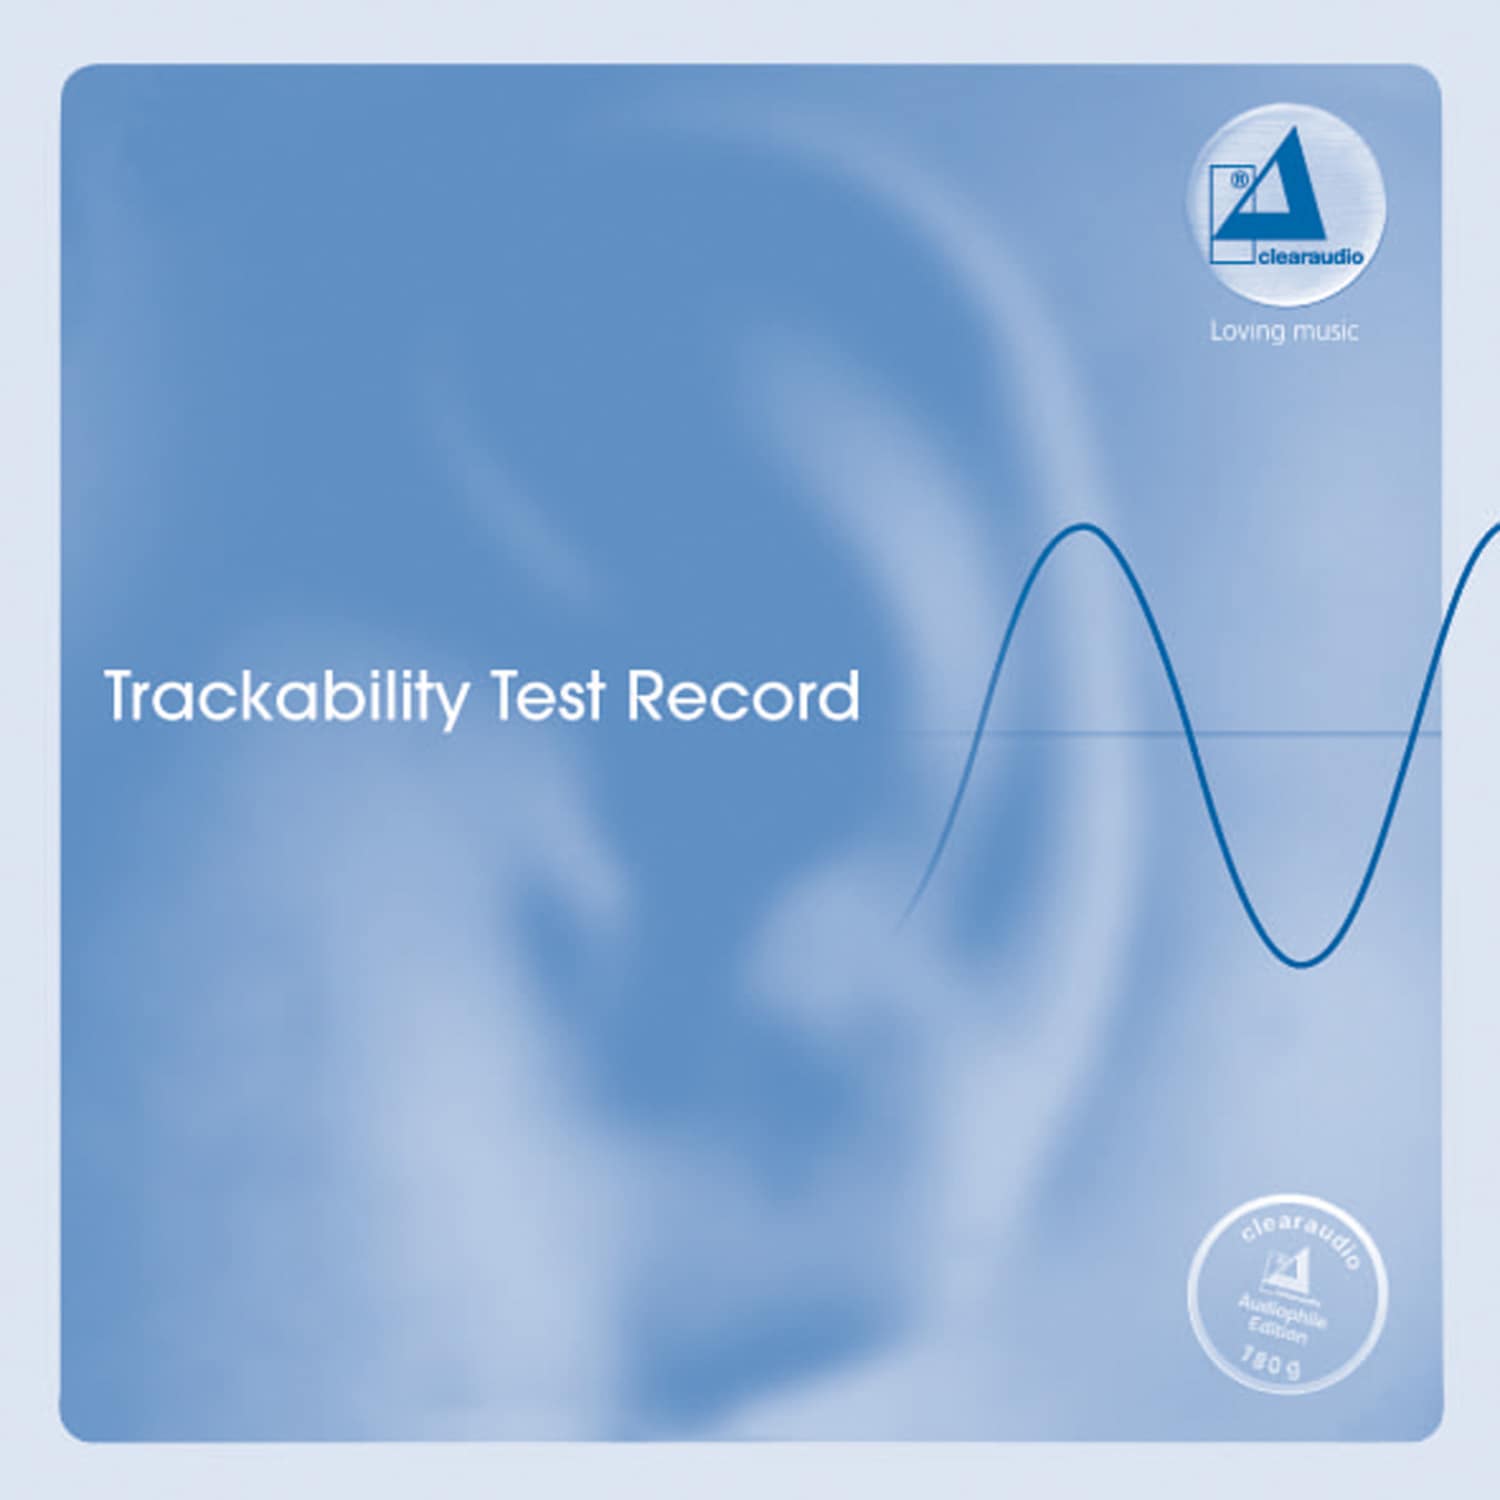 Clearaudio - TRACKABILITY TEST RECORD 